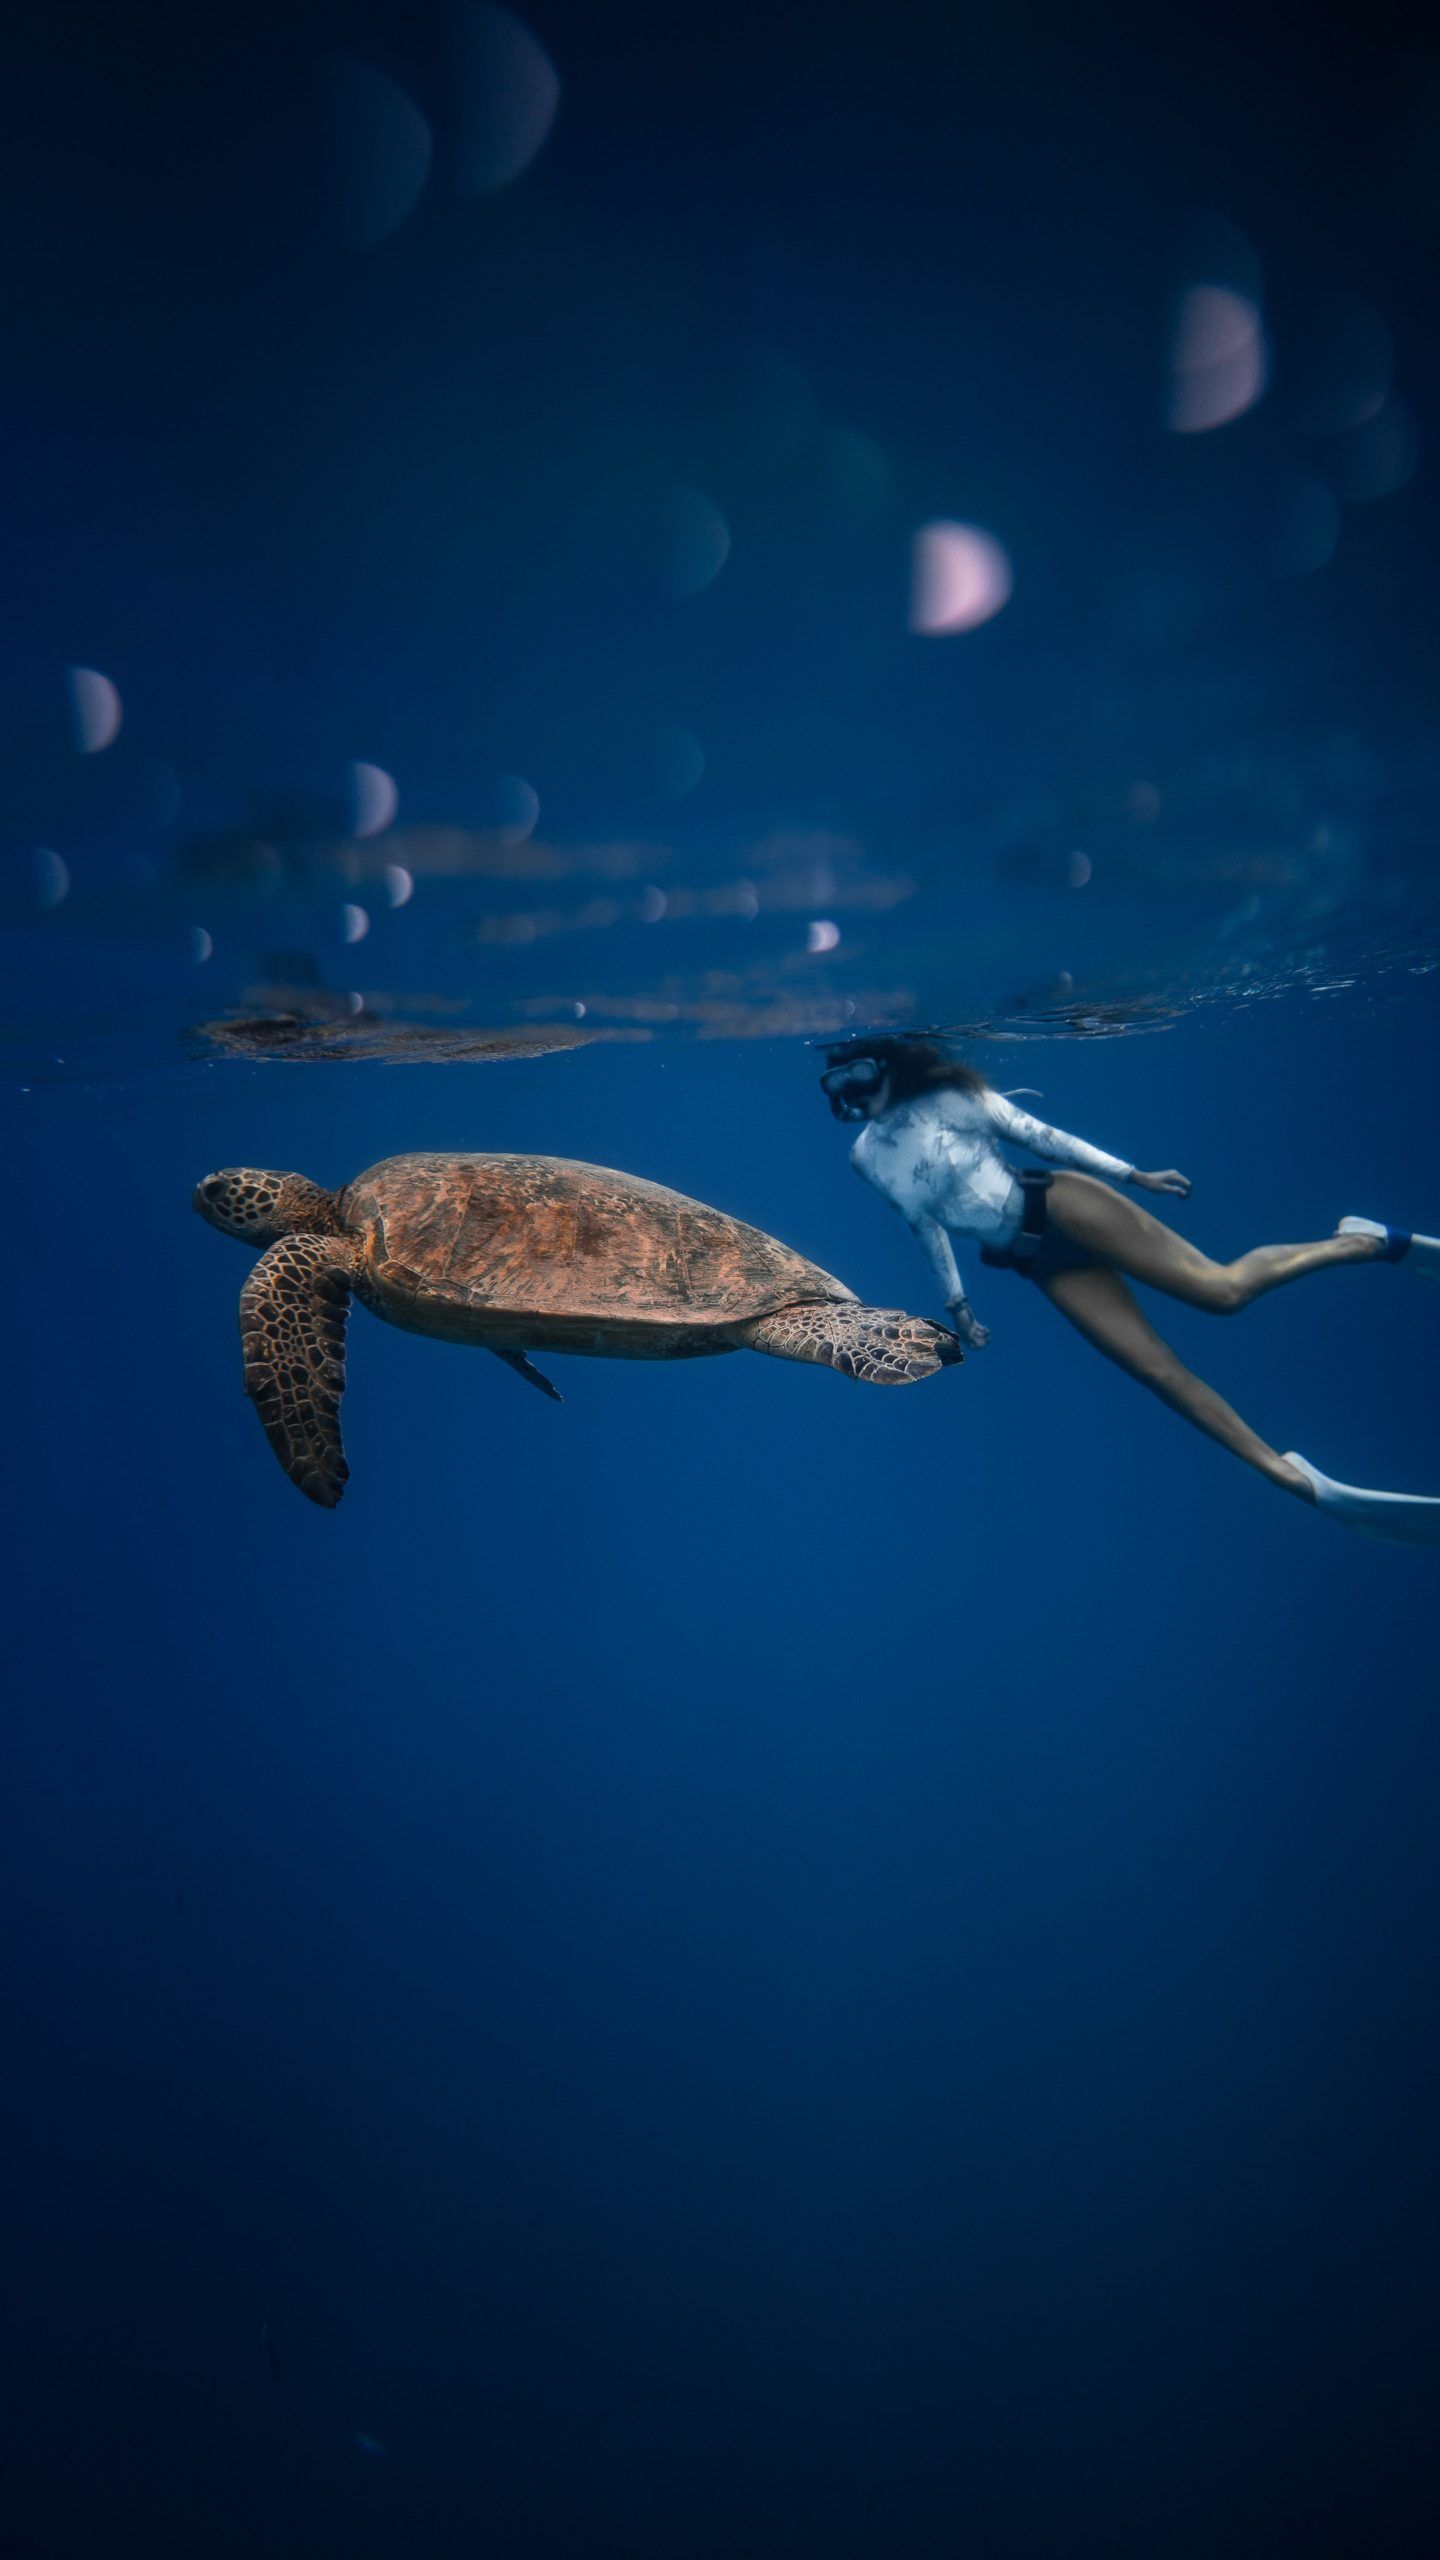 A woman swimming with a turtle in the ocean - Sea turtle